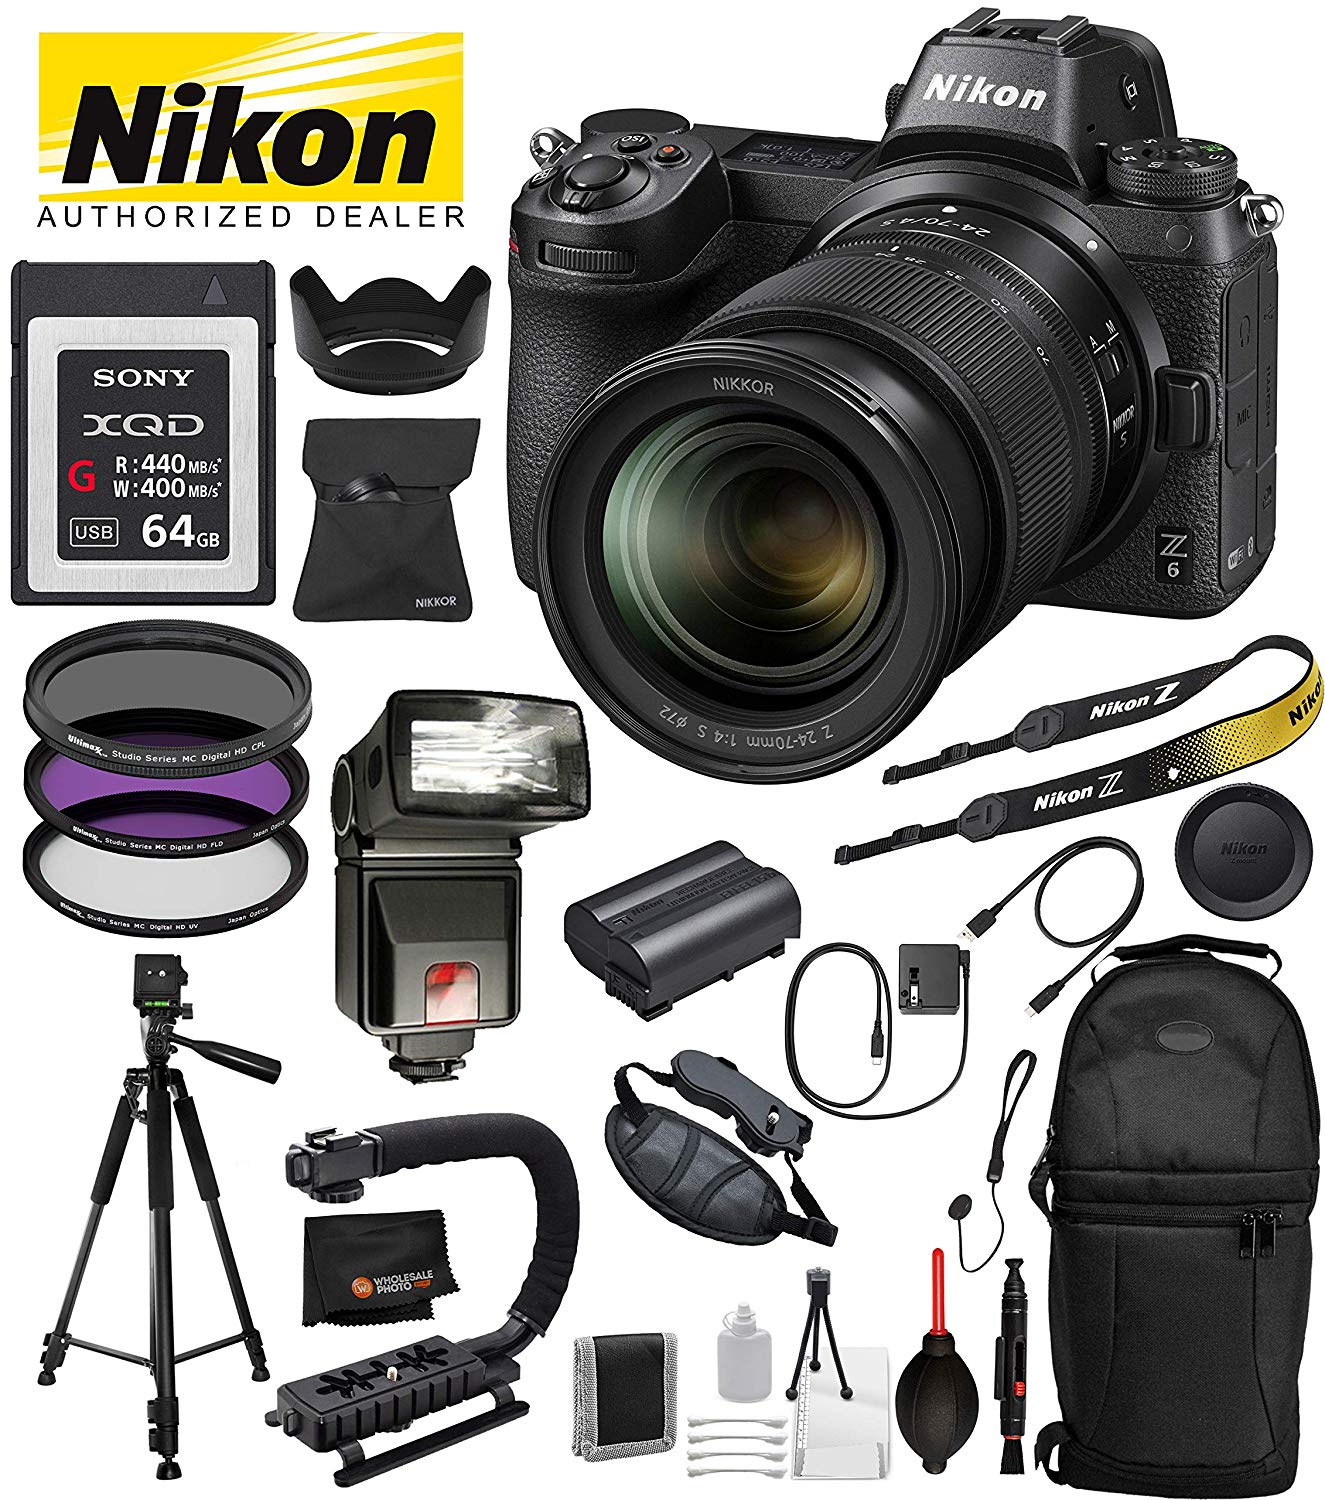 Nikon Z 6 Mirrorless Digital Camera with NIKKOR Z 24-70mm f/4 S Lens - 1598 and Professional Bundle Package Deal